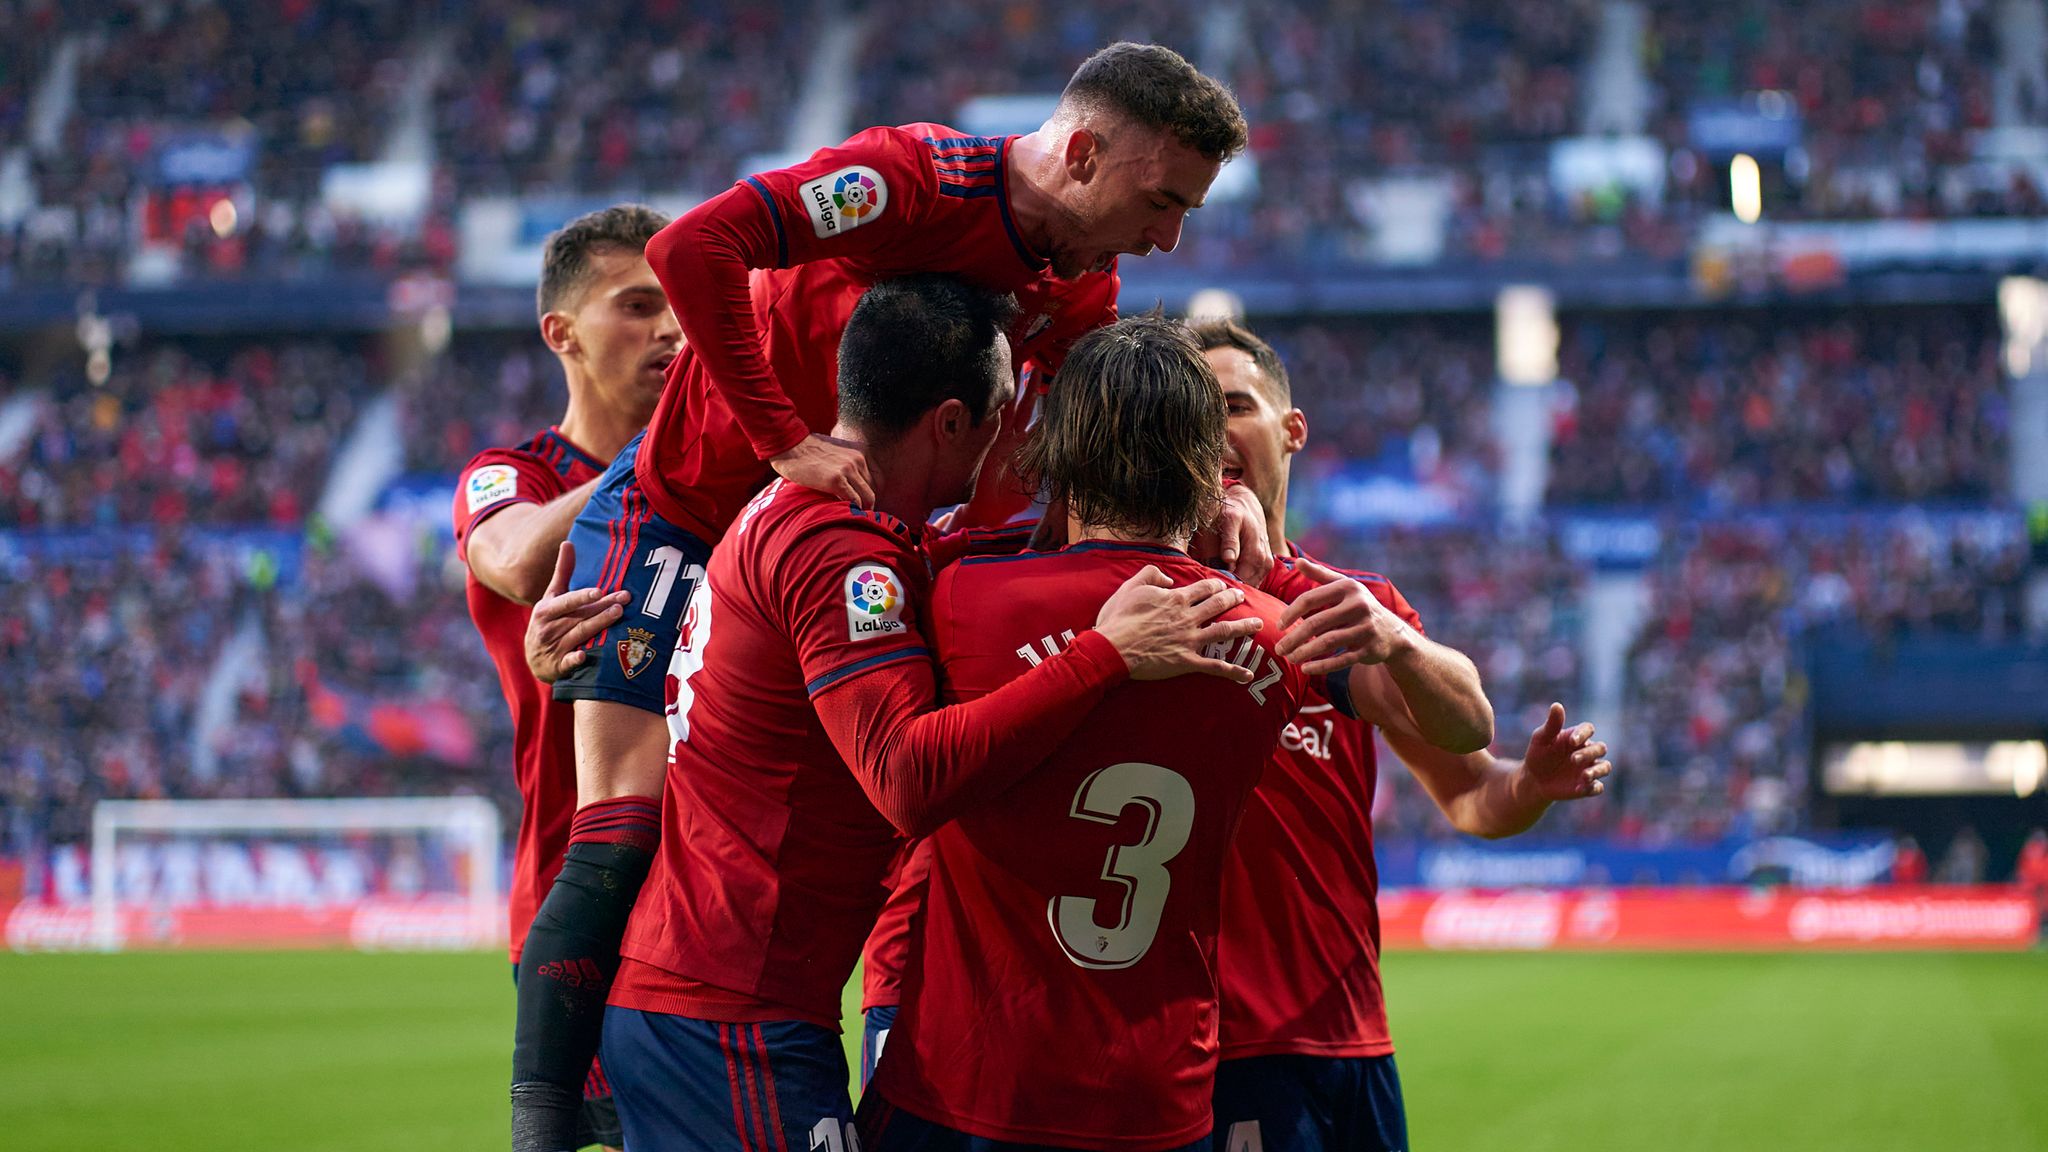 Barcelona remain eighth in La Liga after Osasuna draw as Real Madrid beat Atletico Madrid - European round-up